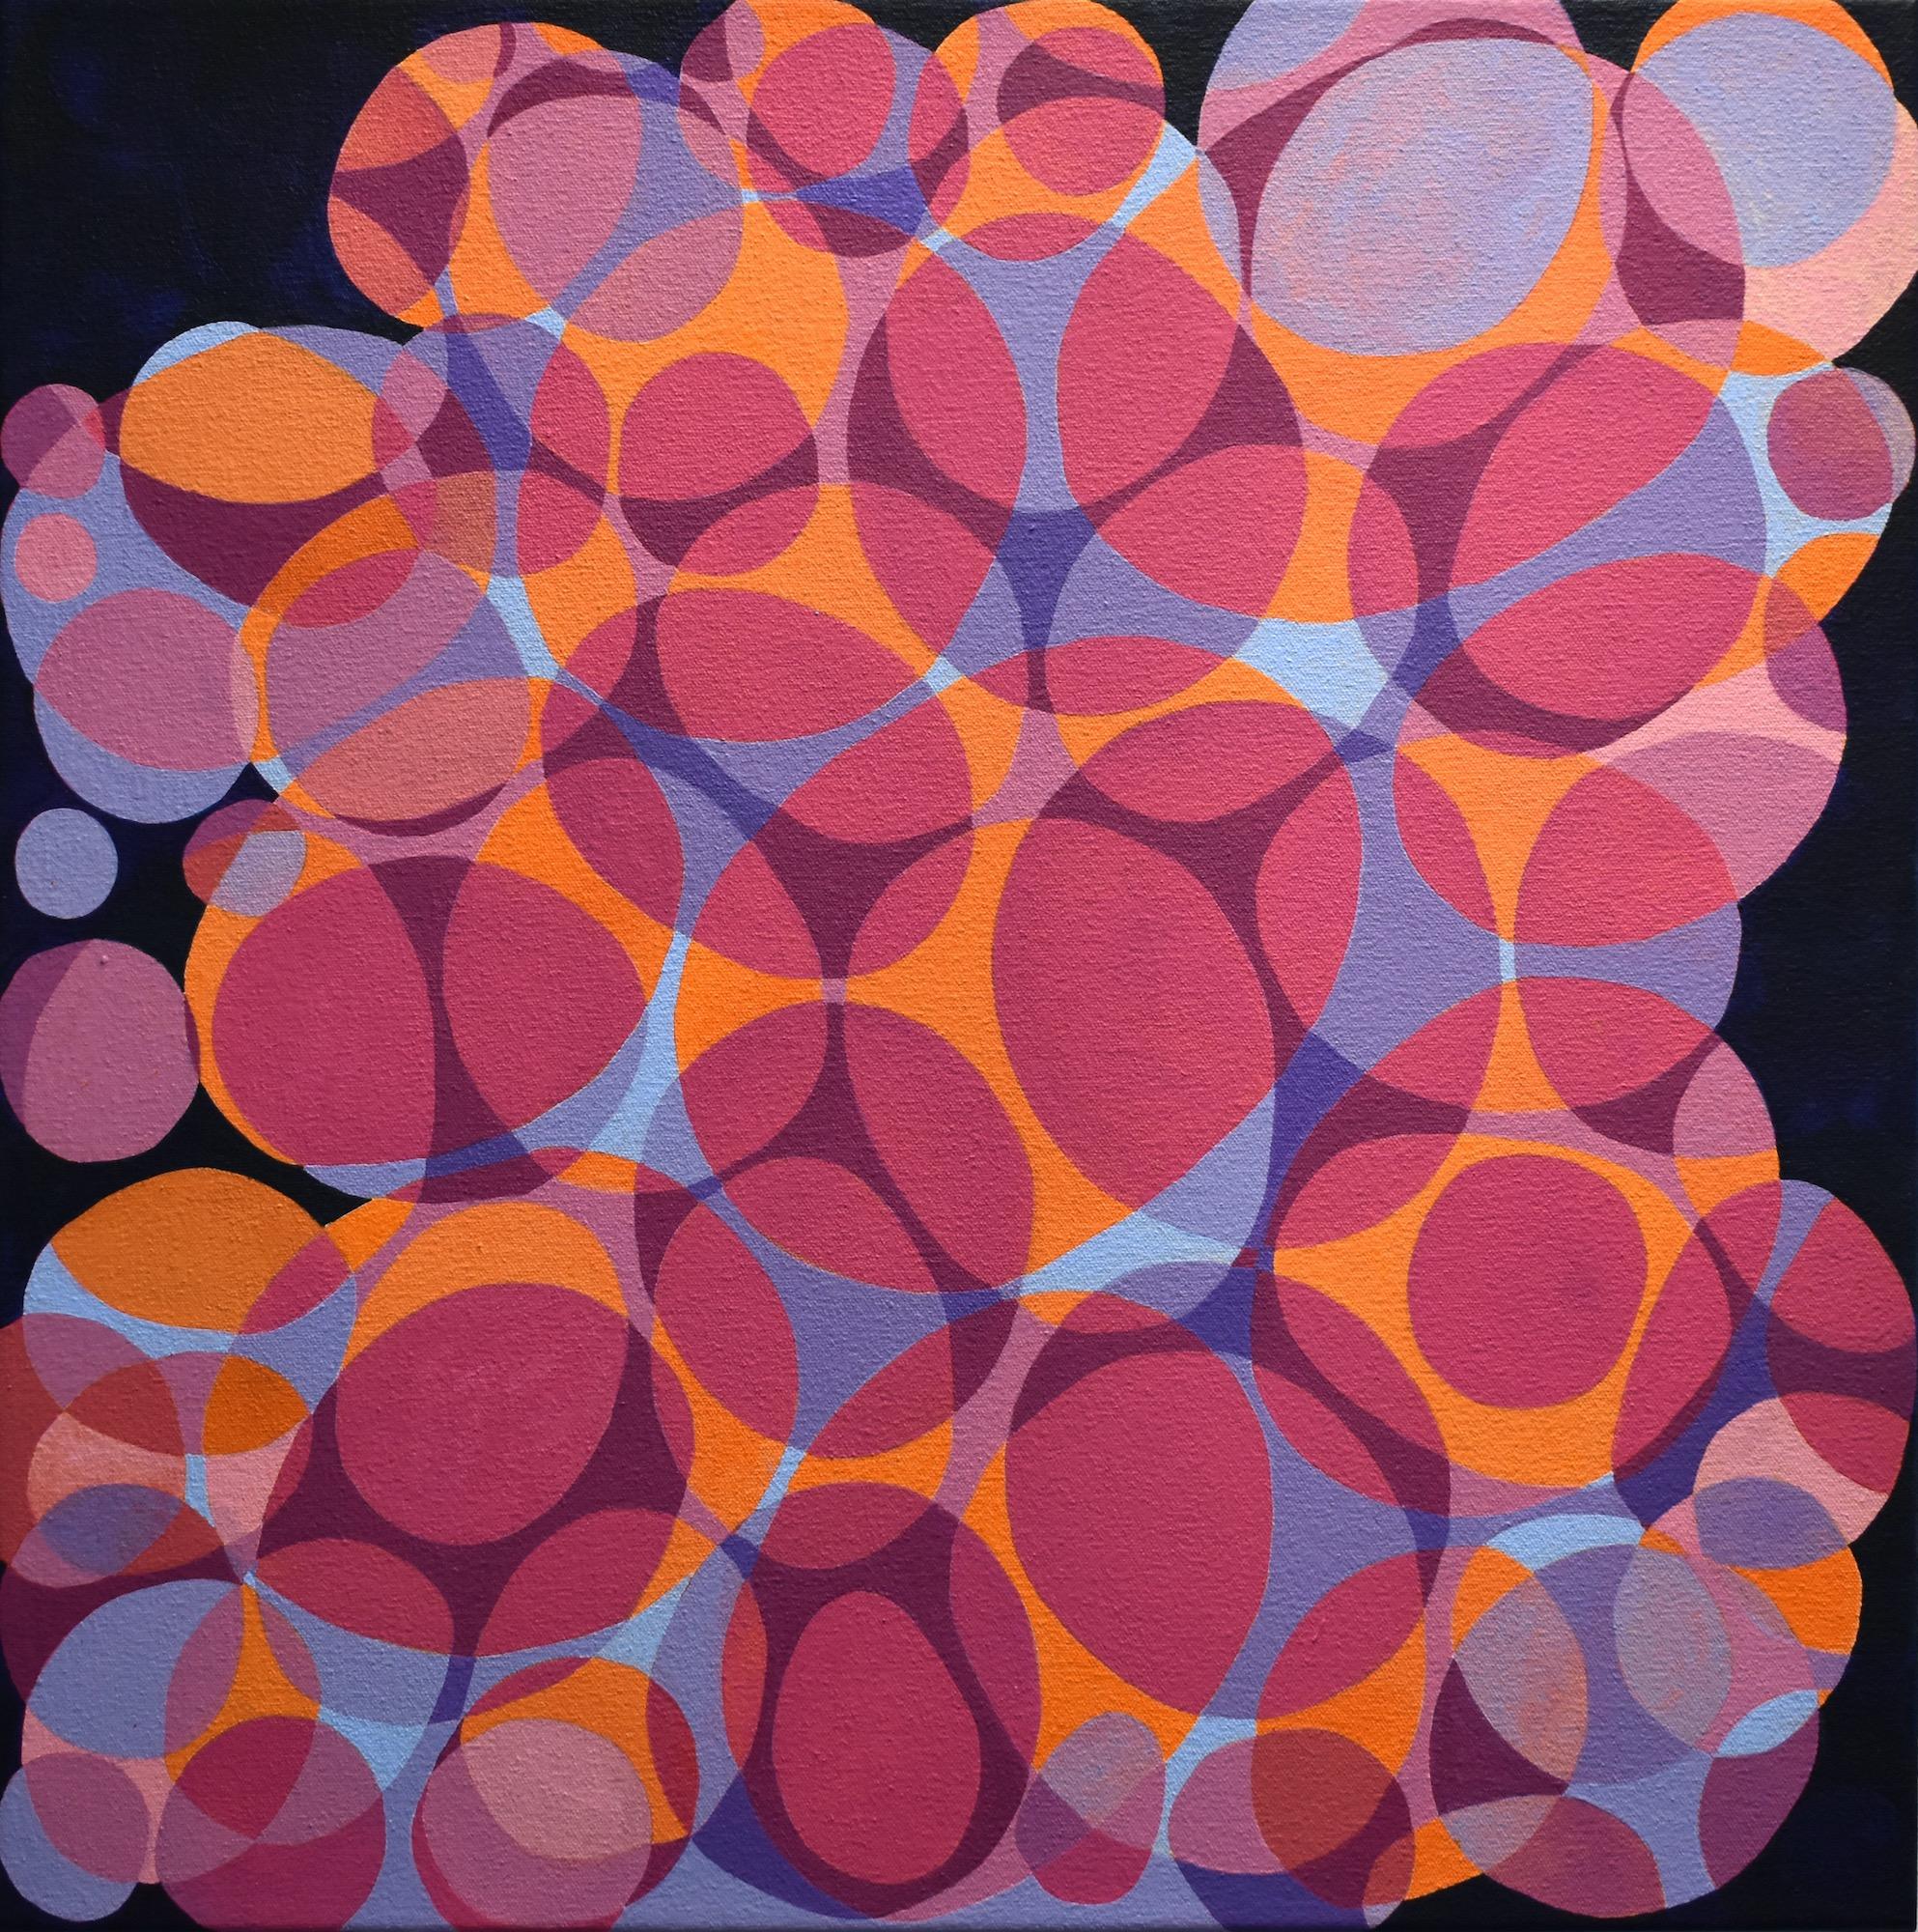 "Kinship 6", abstract, webs, bubbles, ovals, magenta, orange, acrylic painting - Painting by Denise Driscoll